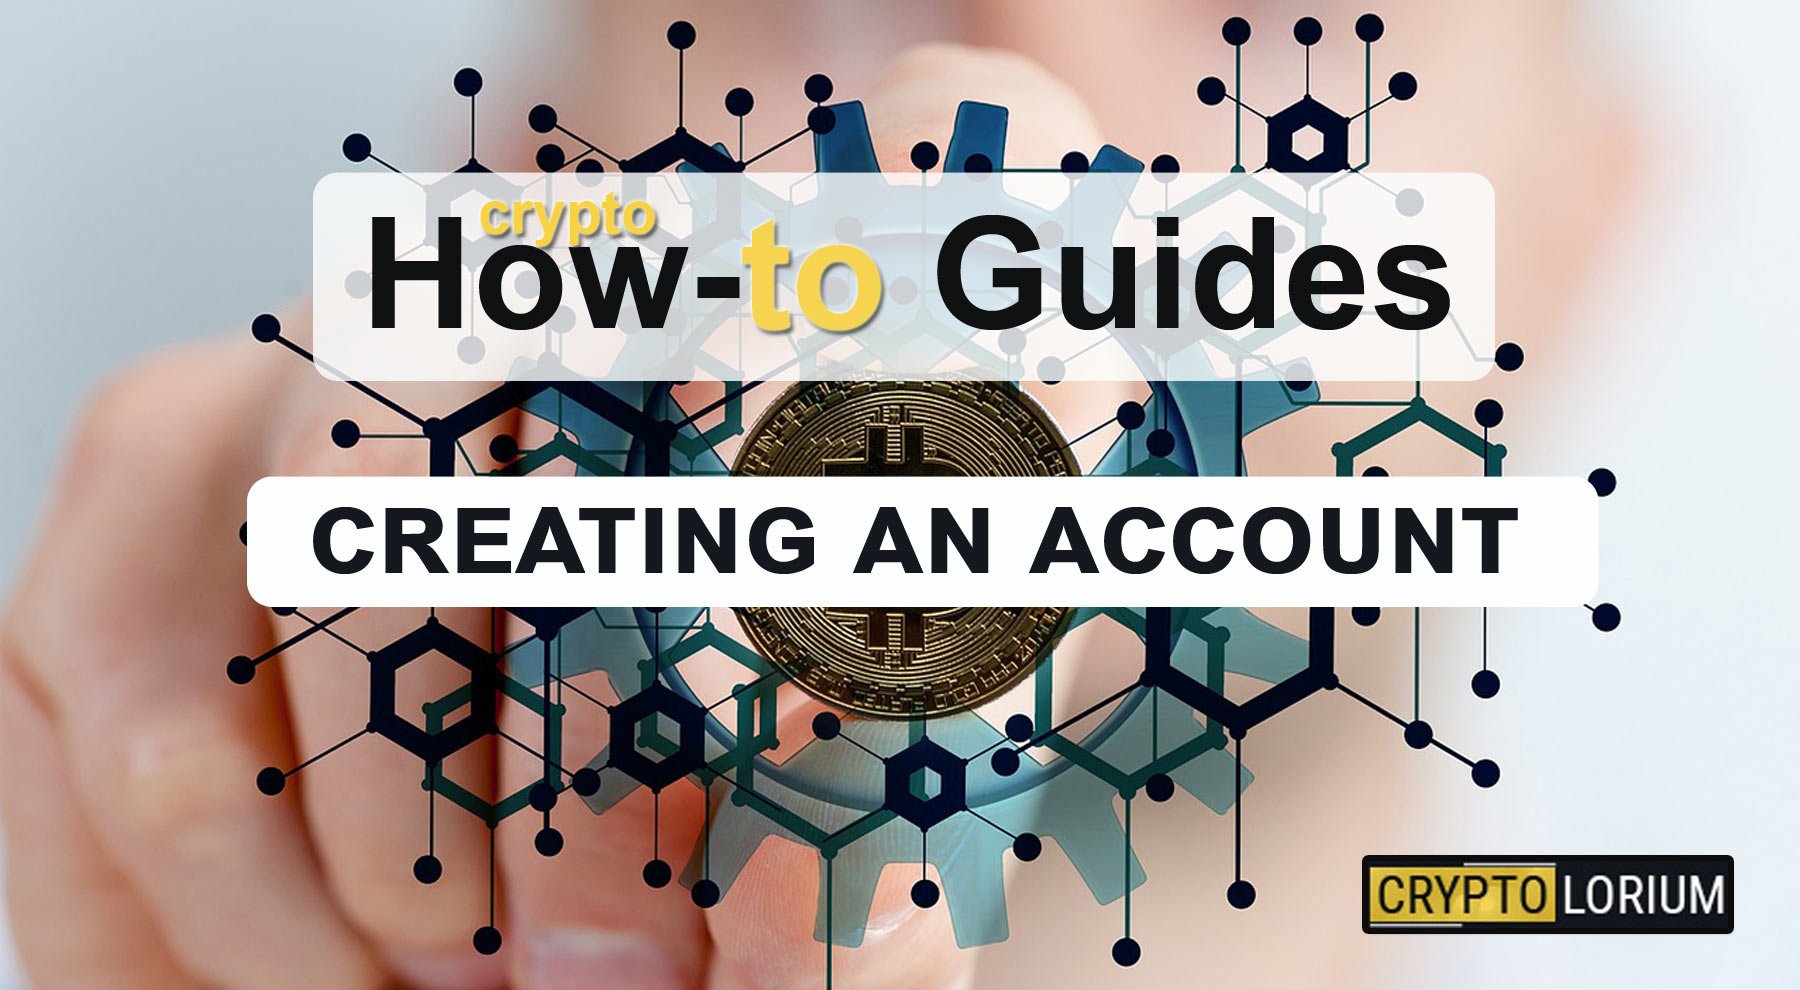 How to create an account